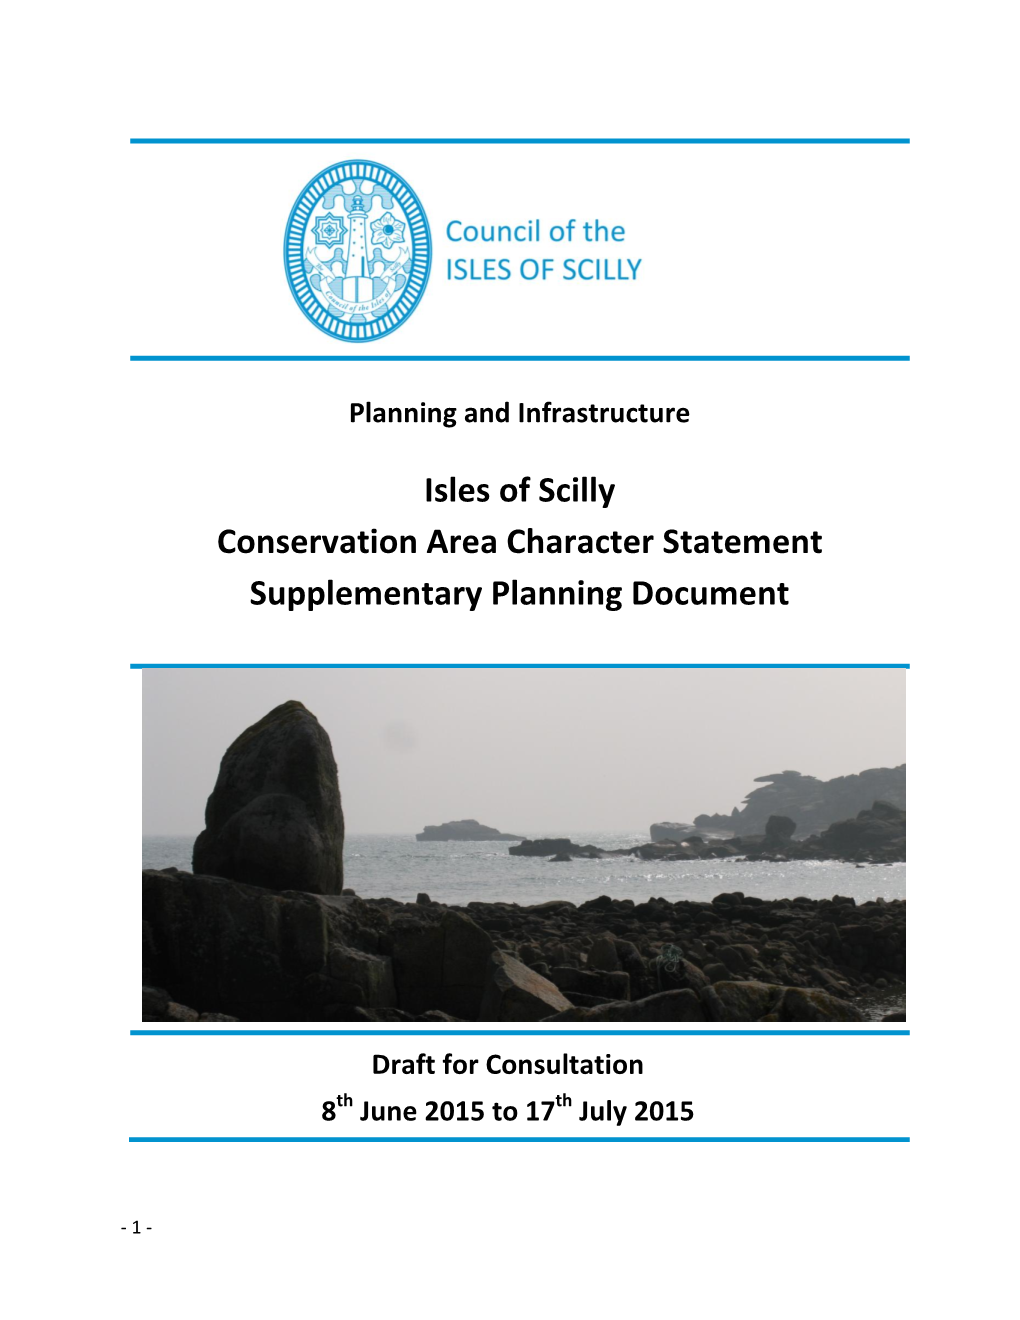 Conservation Area Appraisal for the Isles of Scilly